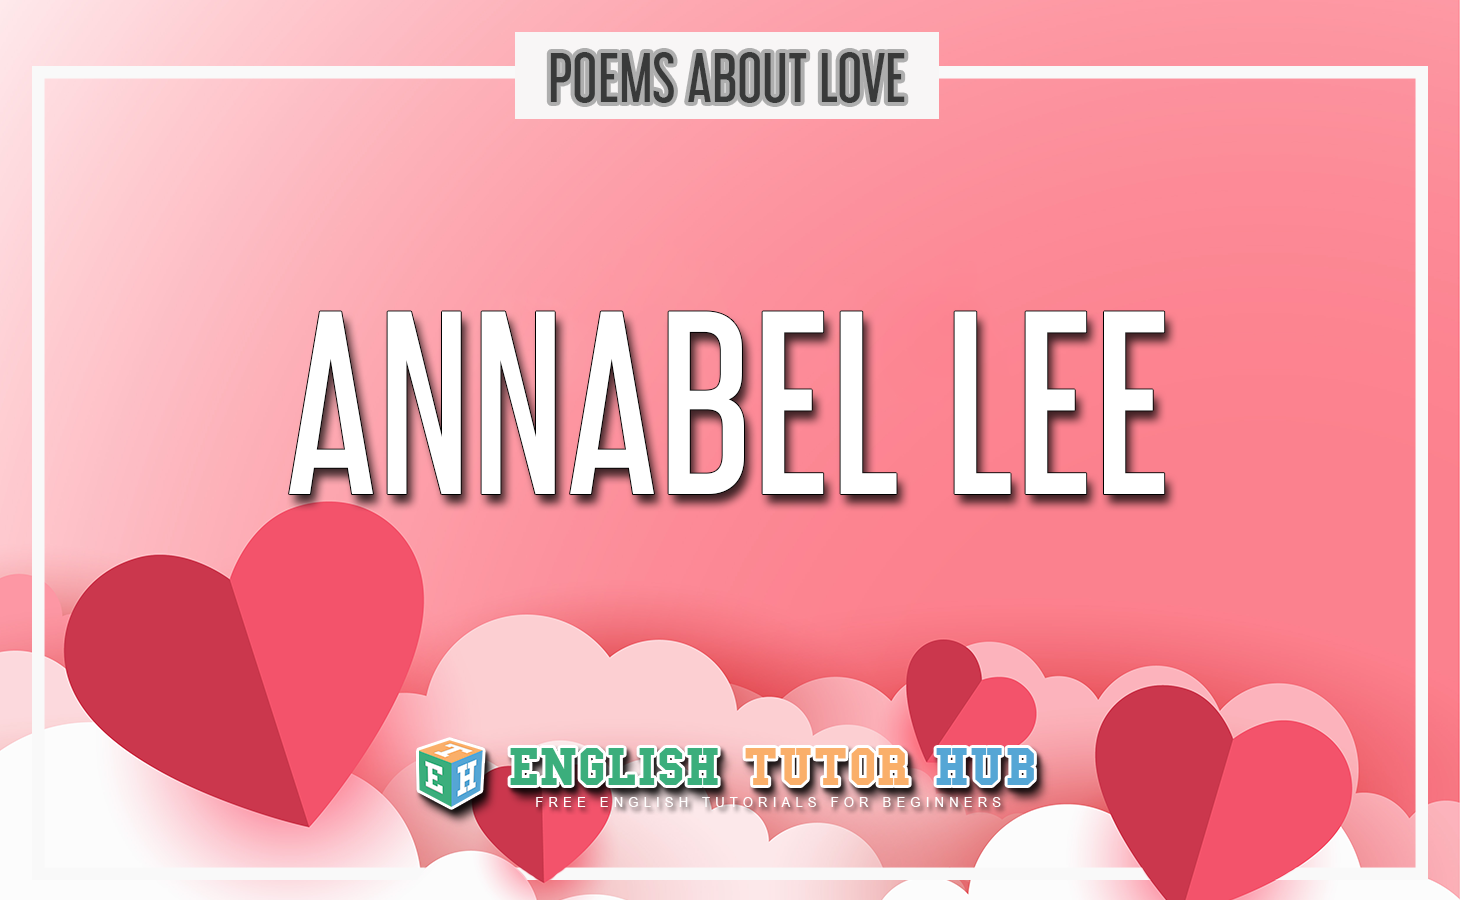 Annabel Lee by Edgar Allan Poe - Summary and Meaning [2022]